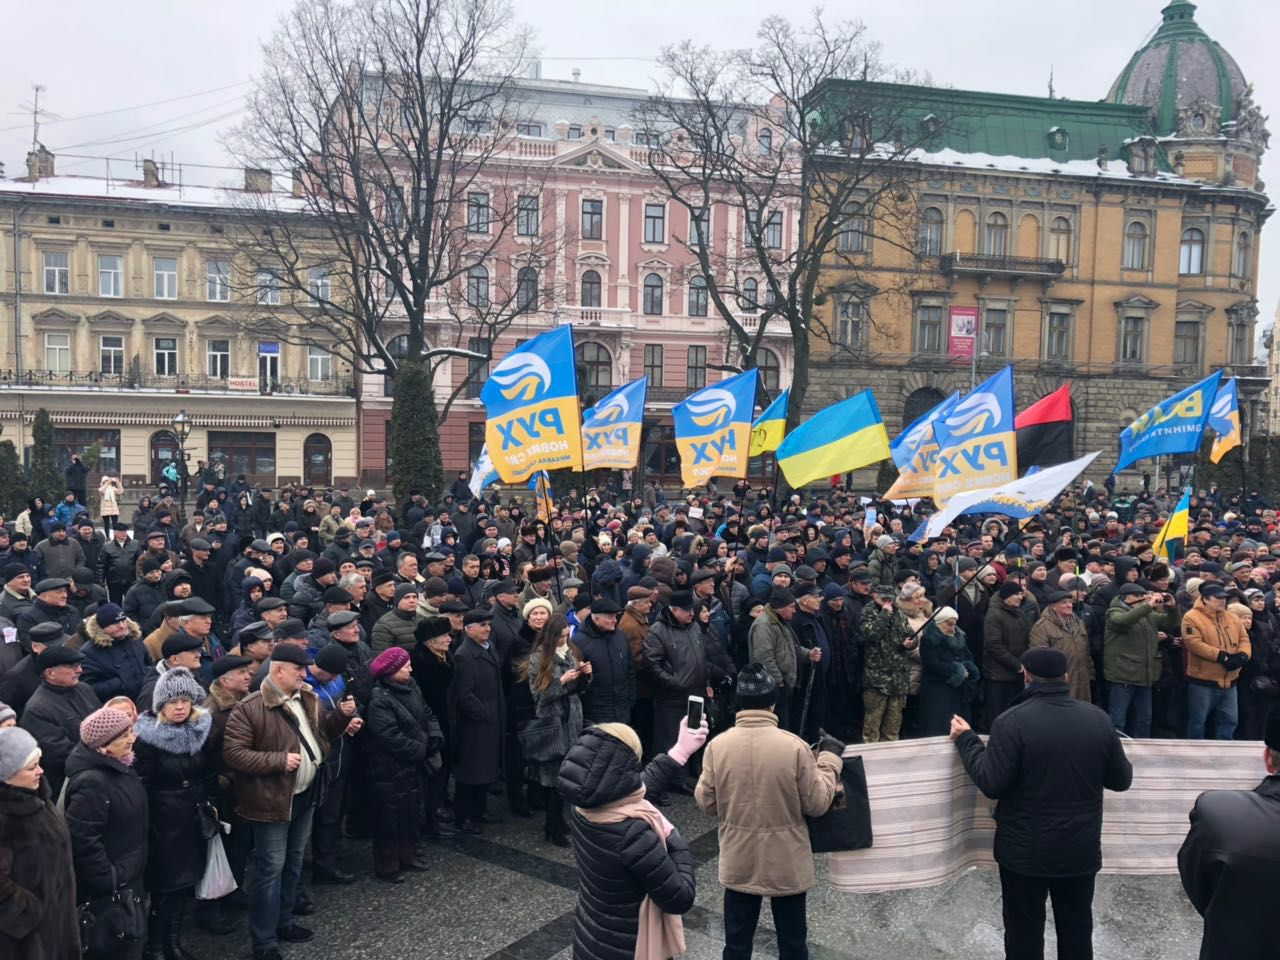 Saakashvili supporters demand snap elections, announce civil resistance committee creation ~~